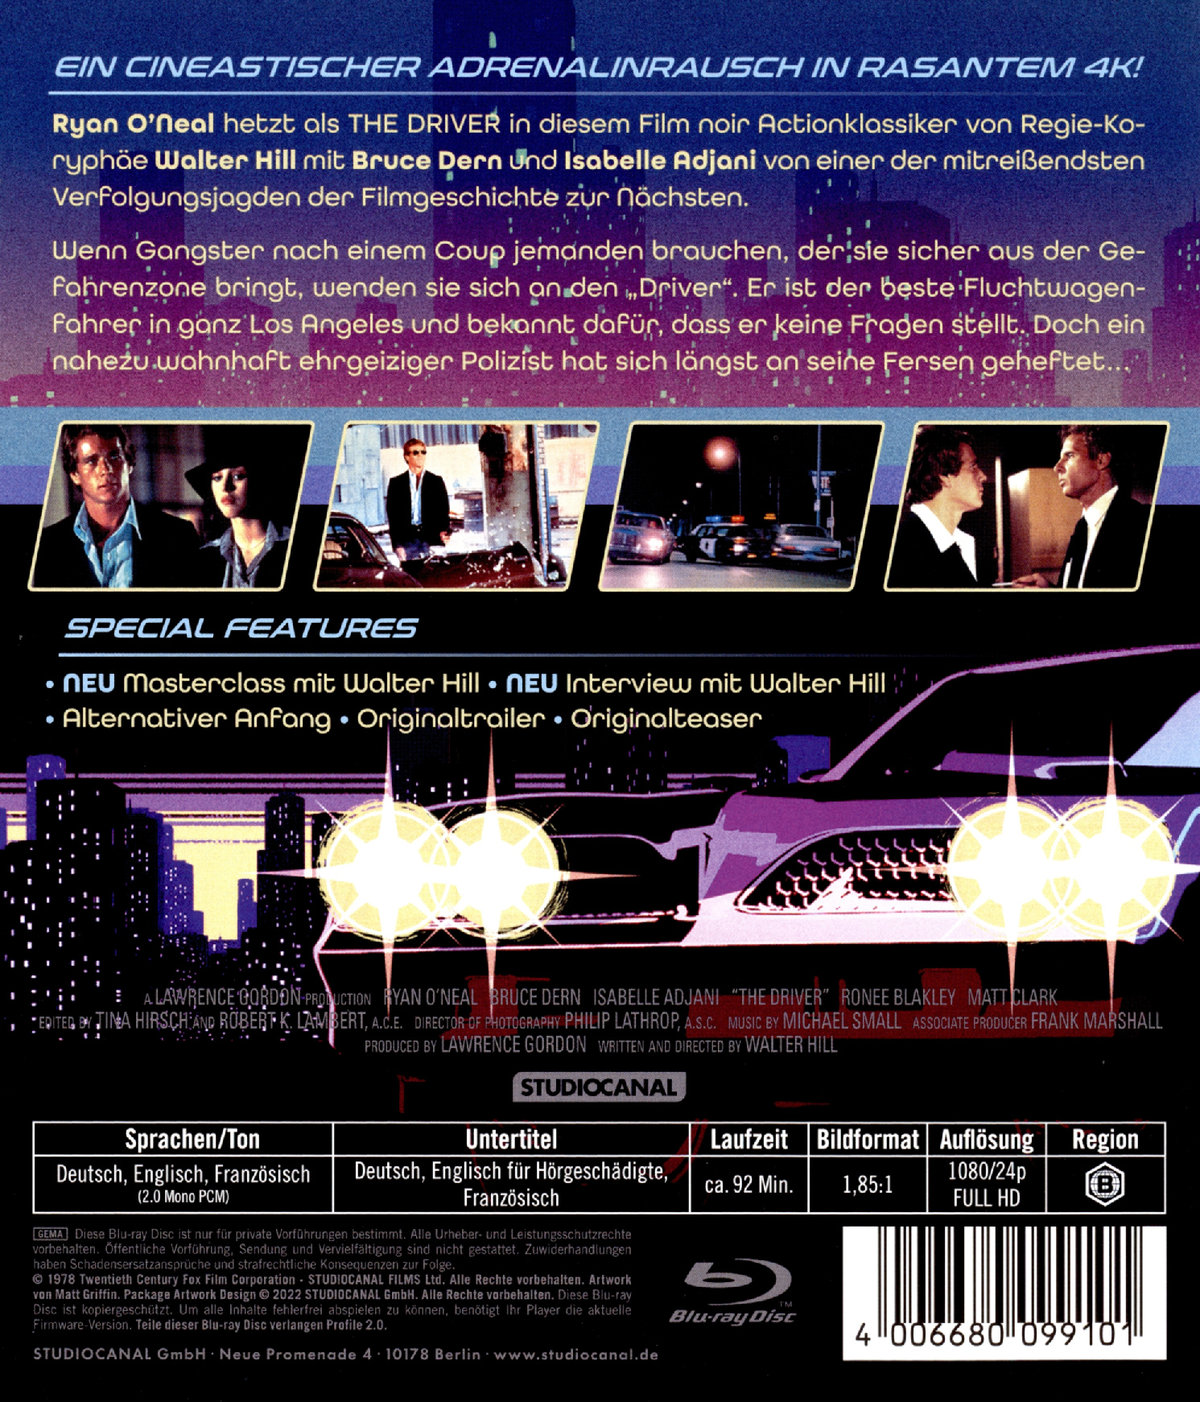 Driver, The - Special Edition (blu-ray)